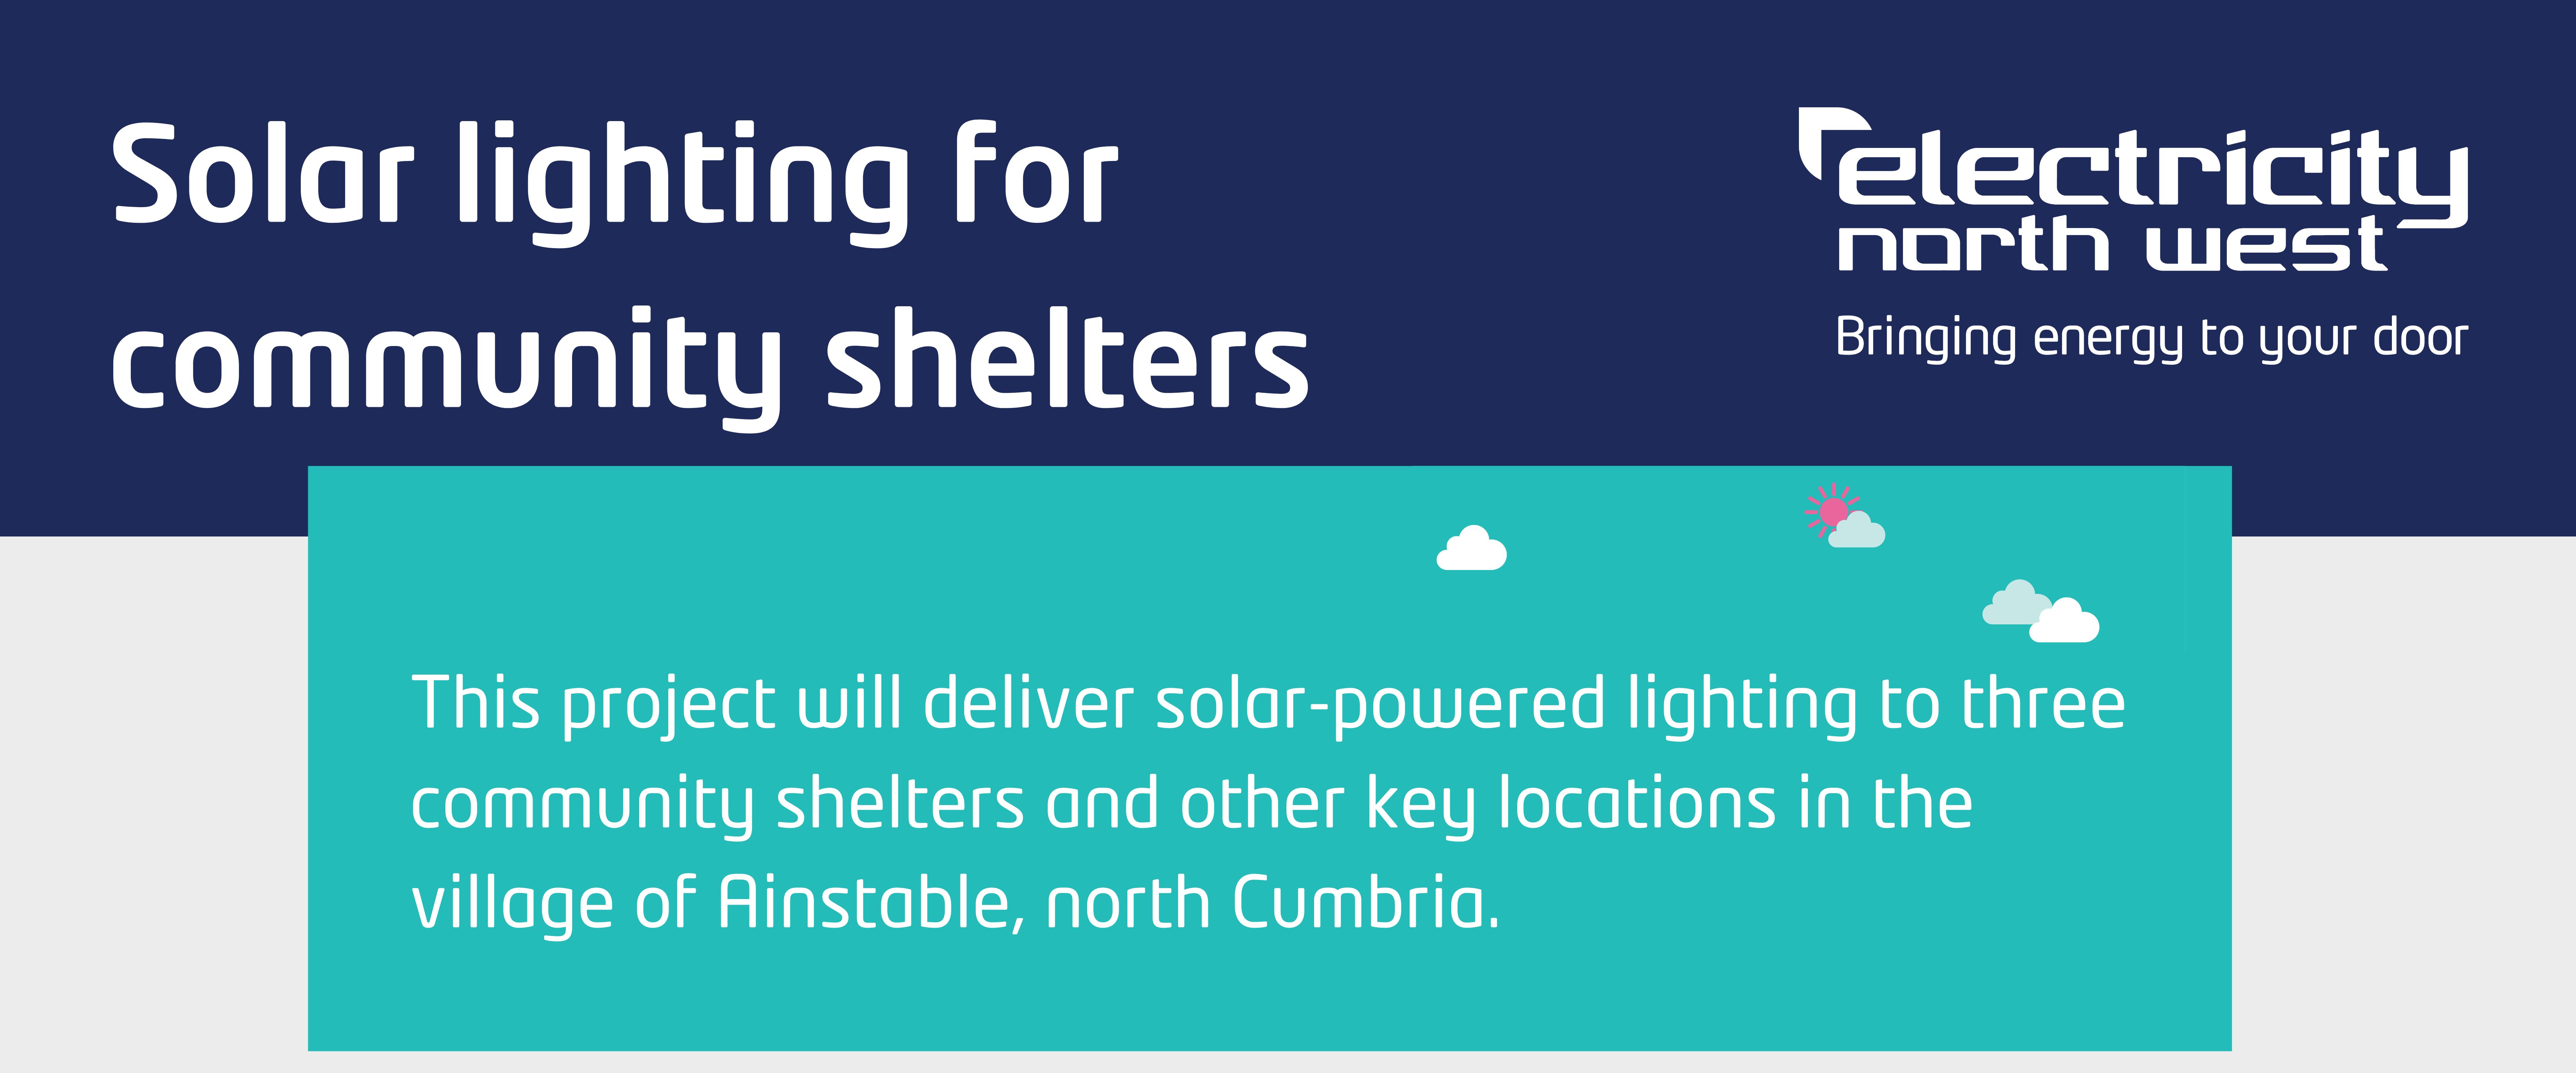 Solar lighting for community shelters, This project will deliver solar-powered lighting to three community shelters and other key locations in the village of Ainstable, north Cumbria.